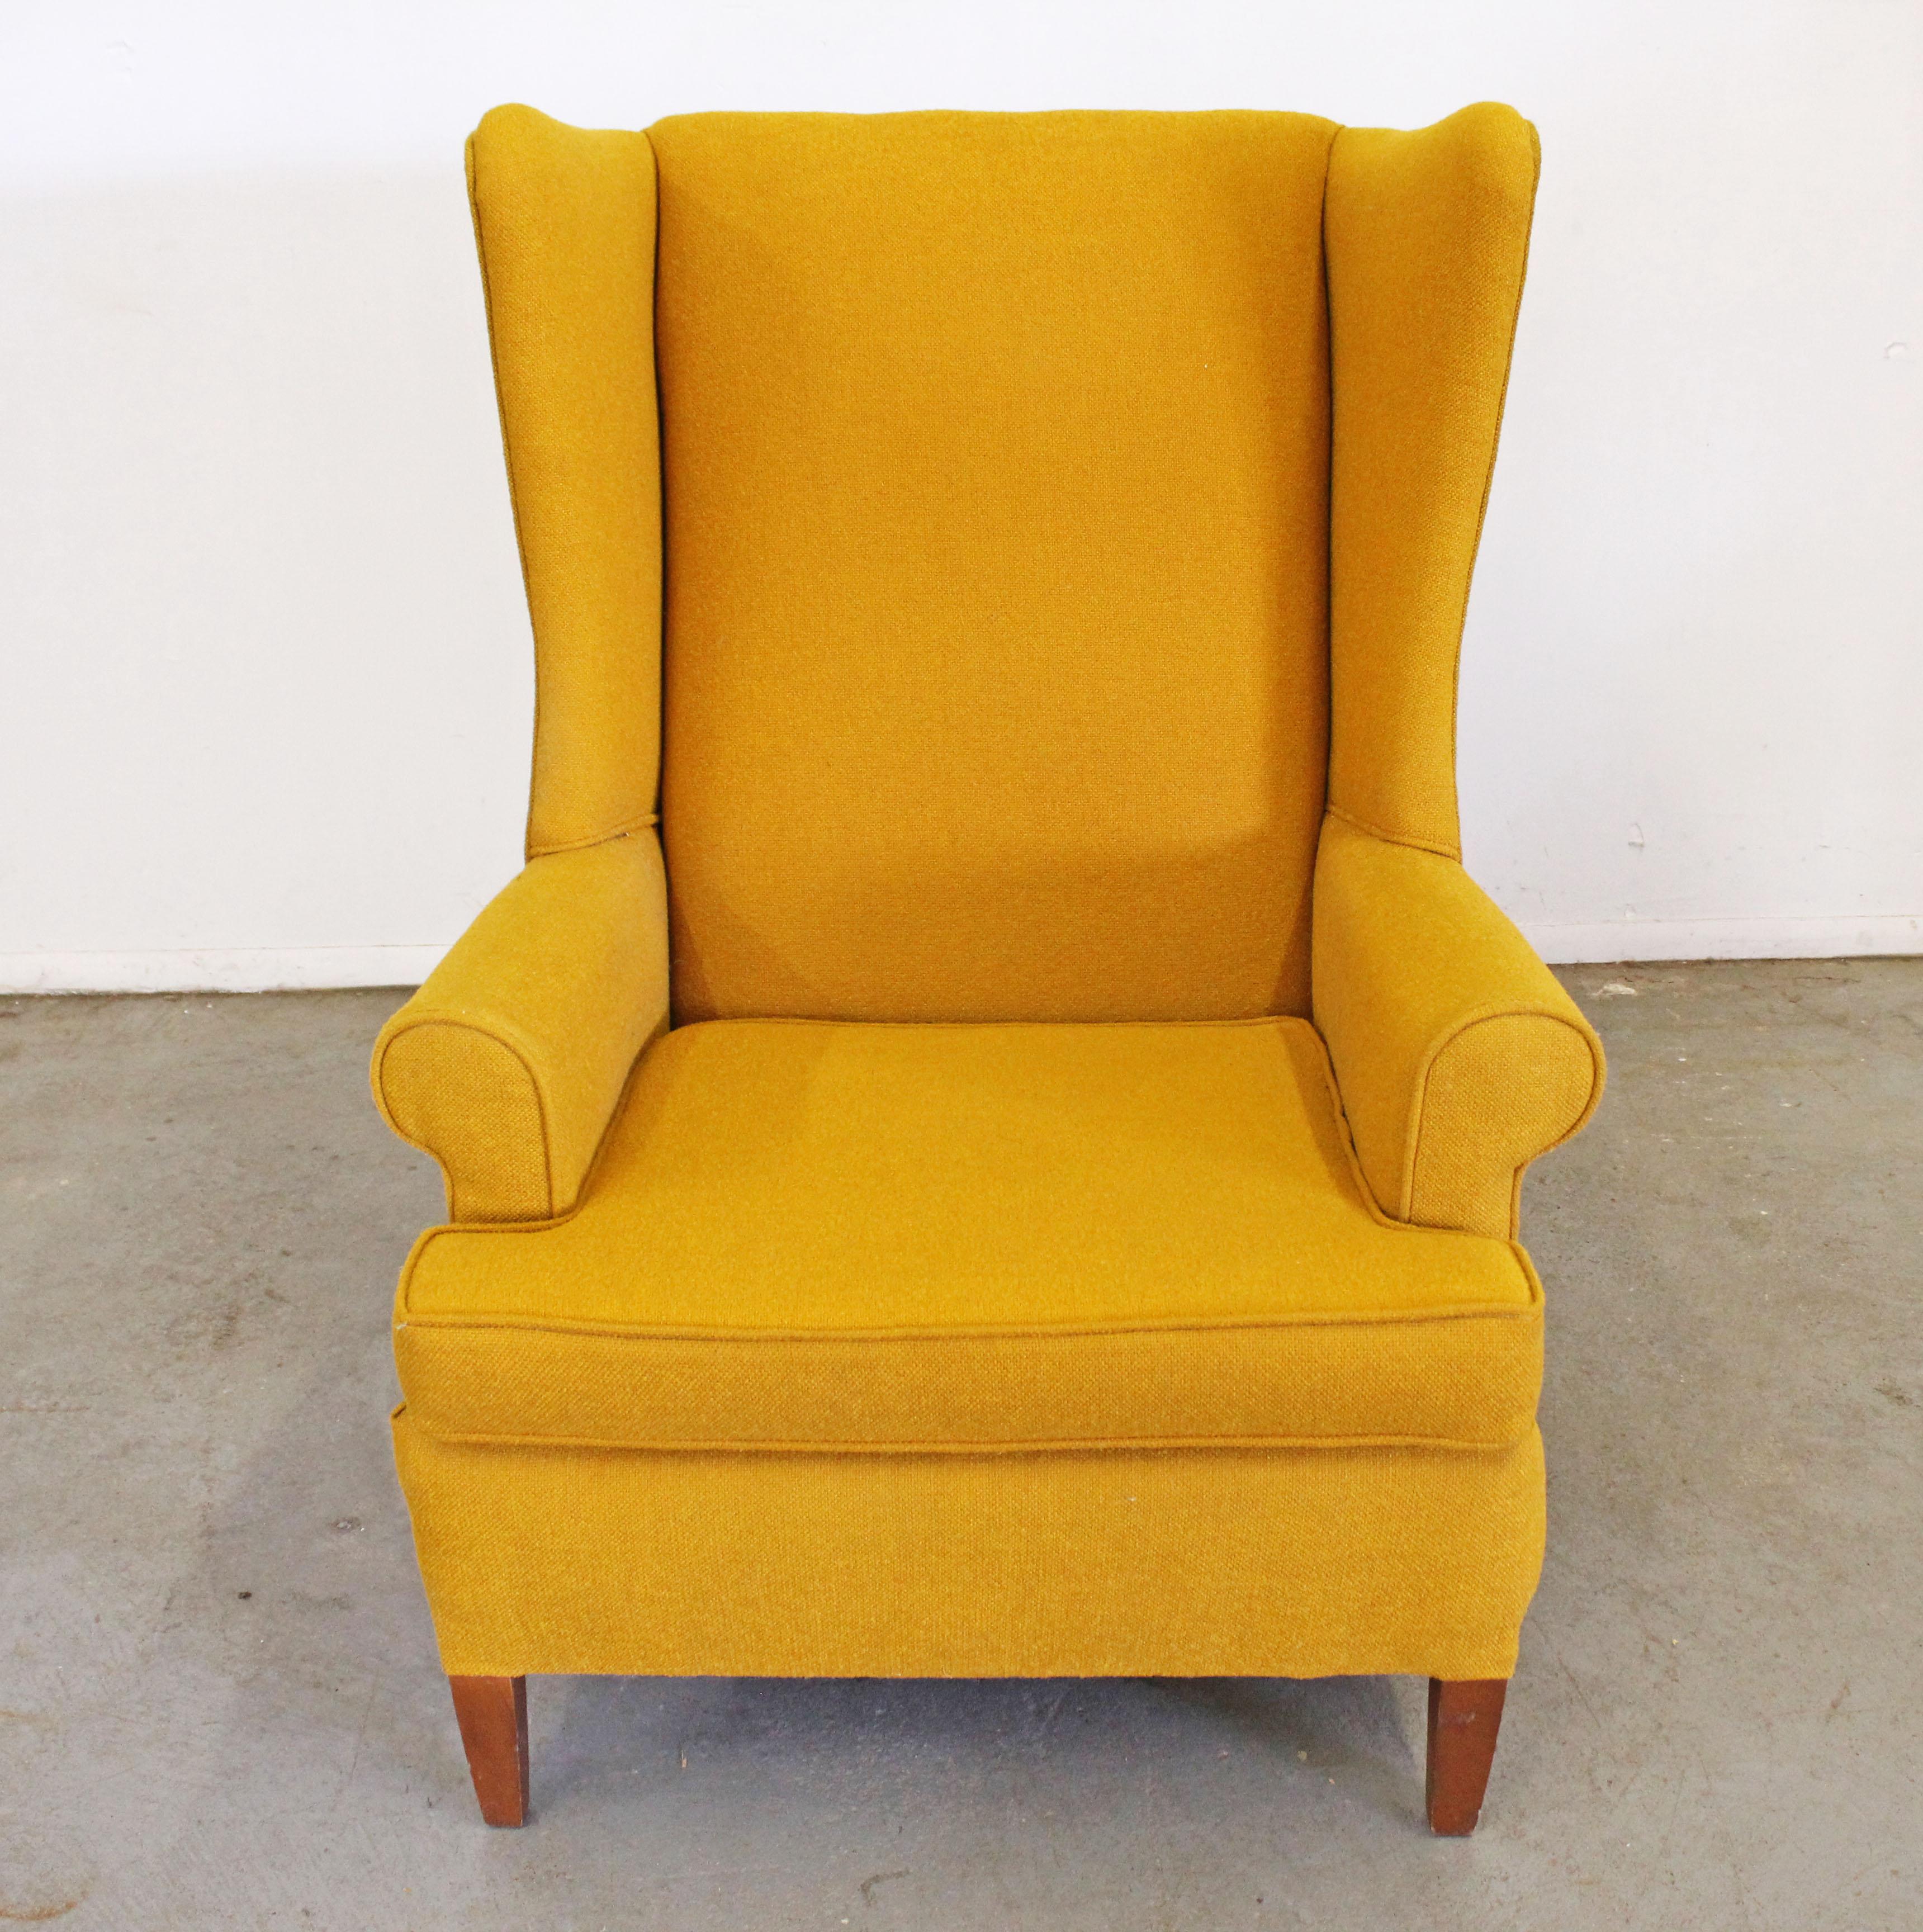 Offered is a vintage wing back chair with textured yellow upholstery and wood legs. It is in good condition with usable upholstery, only showing a slight stain on the back and minor scratches on the legs. It is structurally sound. A great, sturdy